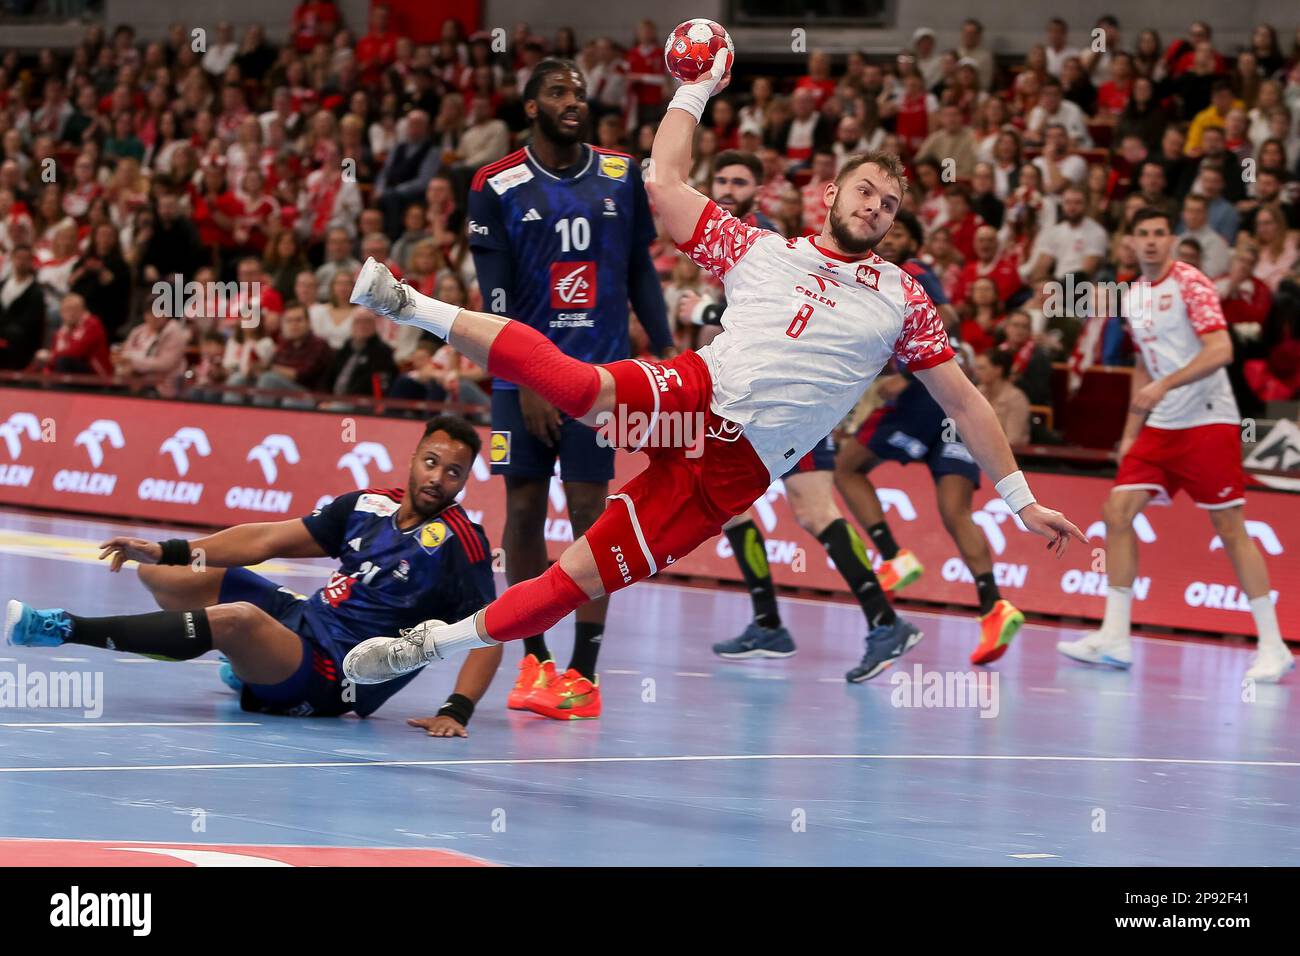 The 2023 World Handball Championship begins with a strong presence from  Joma - Joma World